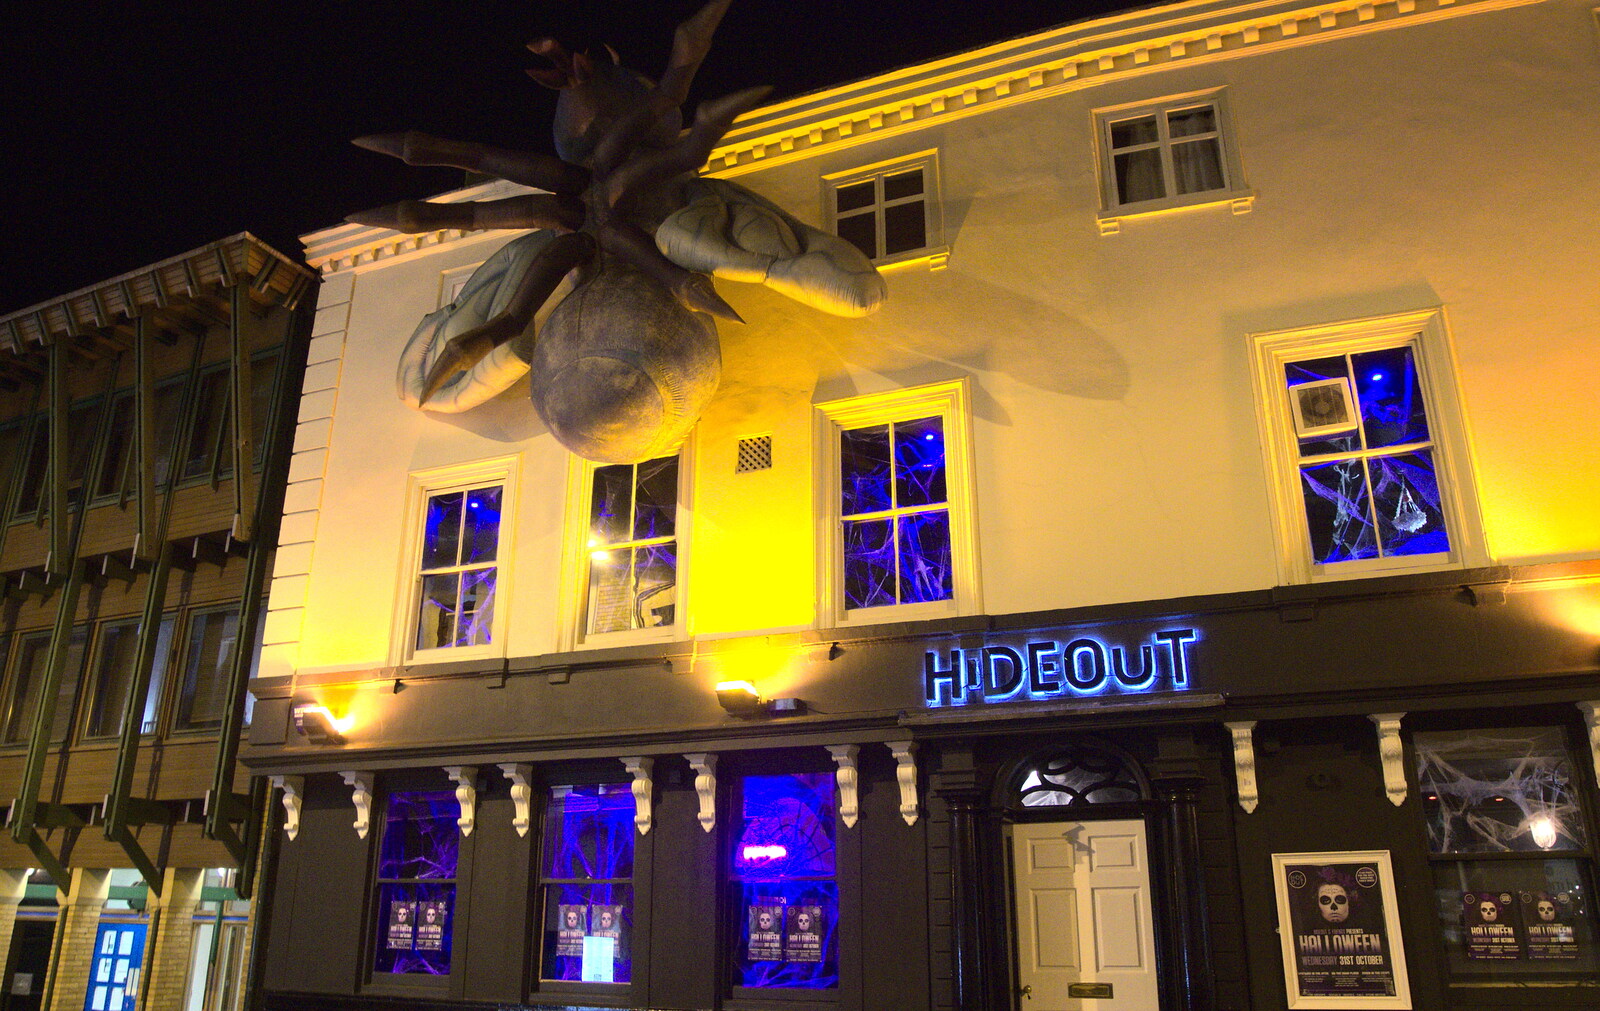 There's a giant spider stuck to Hideout nightclub from The 35th Norwich Beer Festival, St. Andrew's Hall, Norwich - 31st October 2012